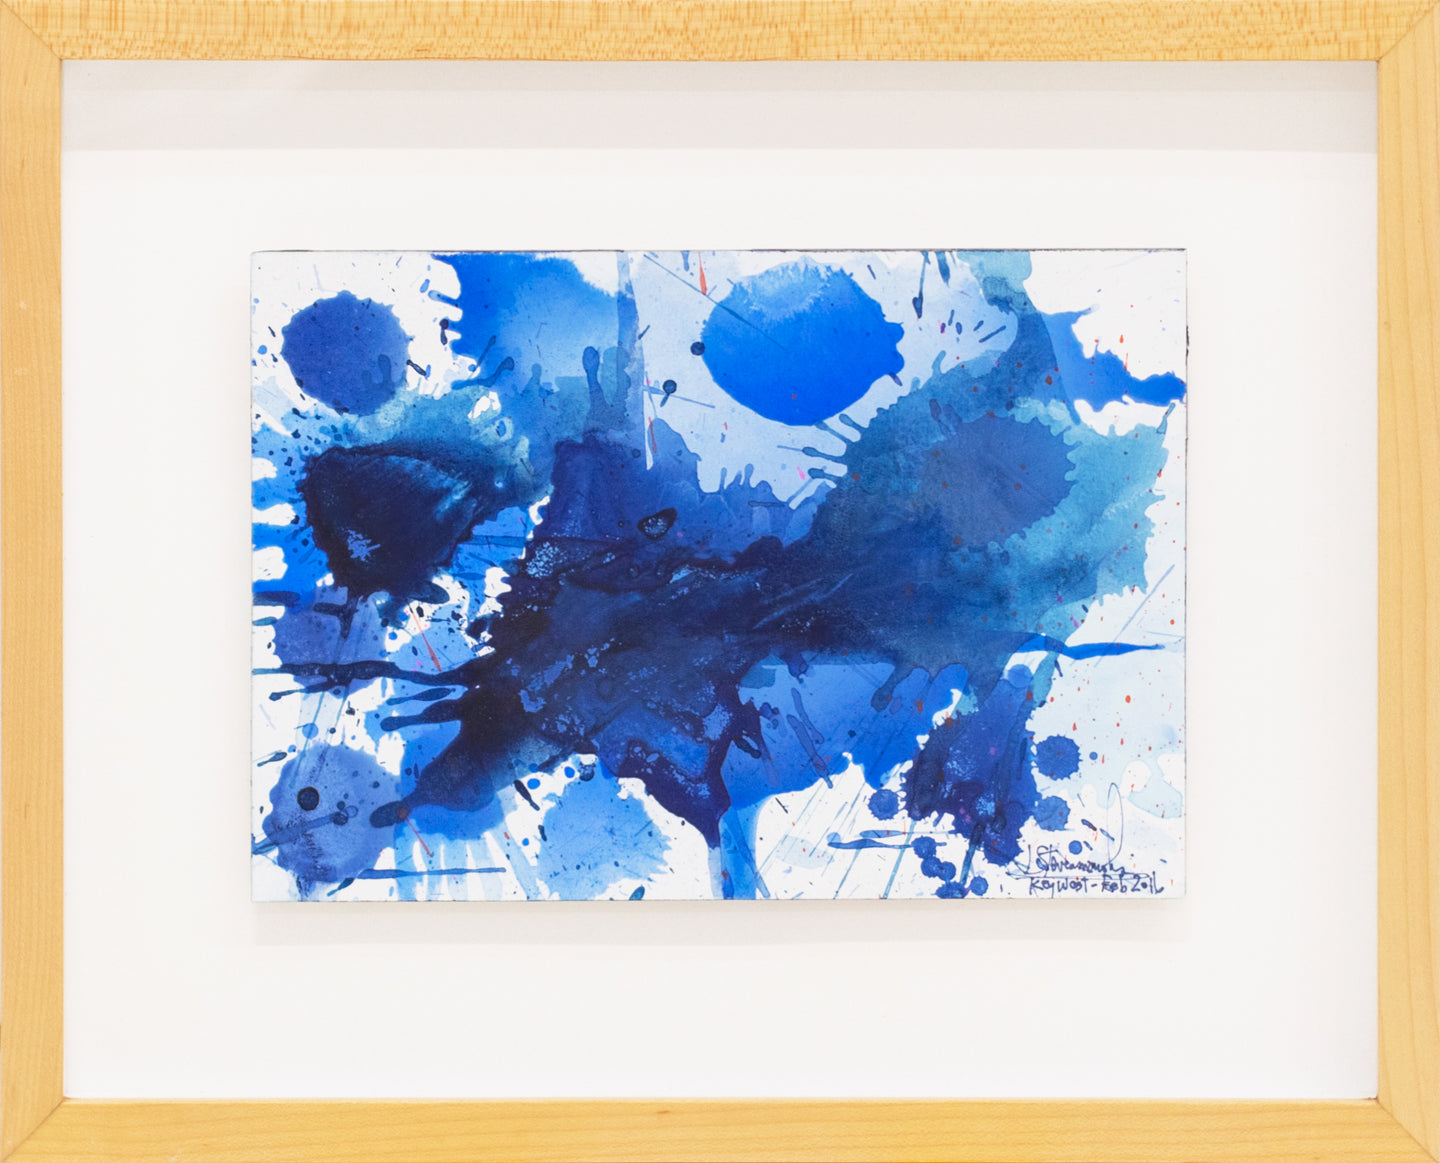 J. Steven Manolis, Splash (Key West) 07.10.09, 2016, Watercolor painting on Arches paper, 7 x 10 inches, Blue Abstract Art, Splash Art for sale at Manolis Projects Art Gallery, Miami, Fl